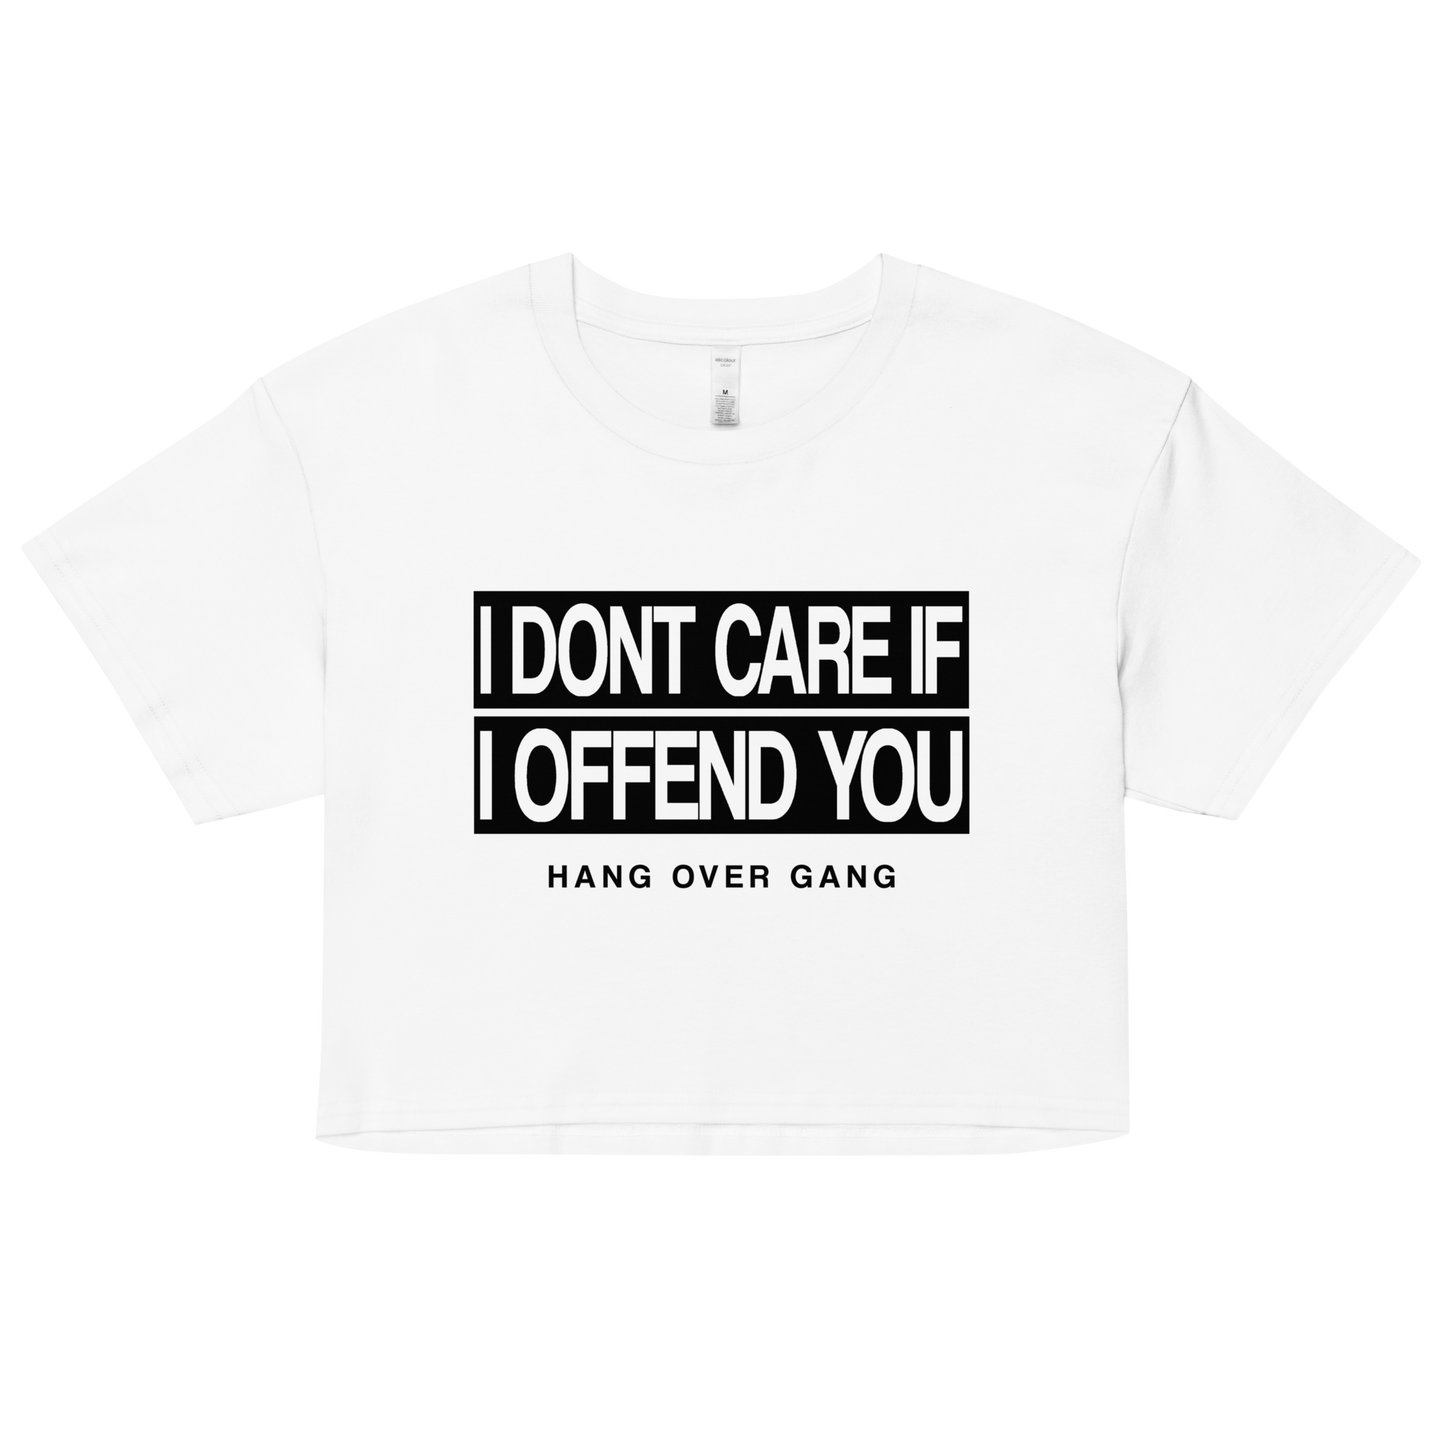 Womens "I Dont Care If I Offend You" Crop top